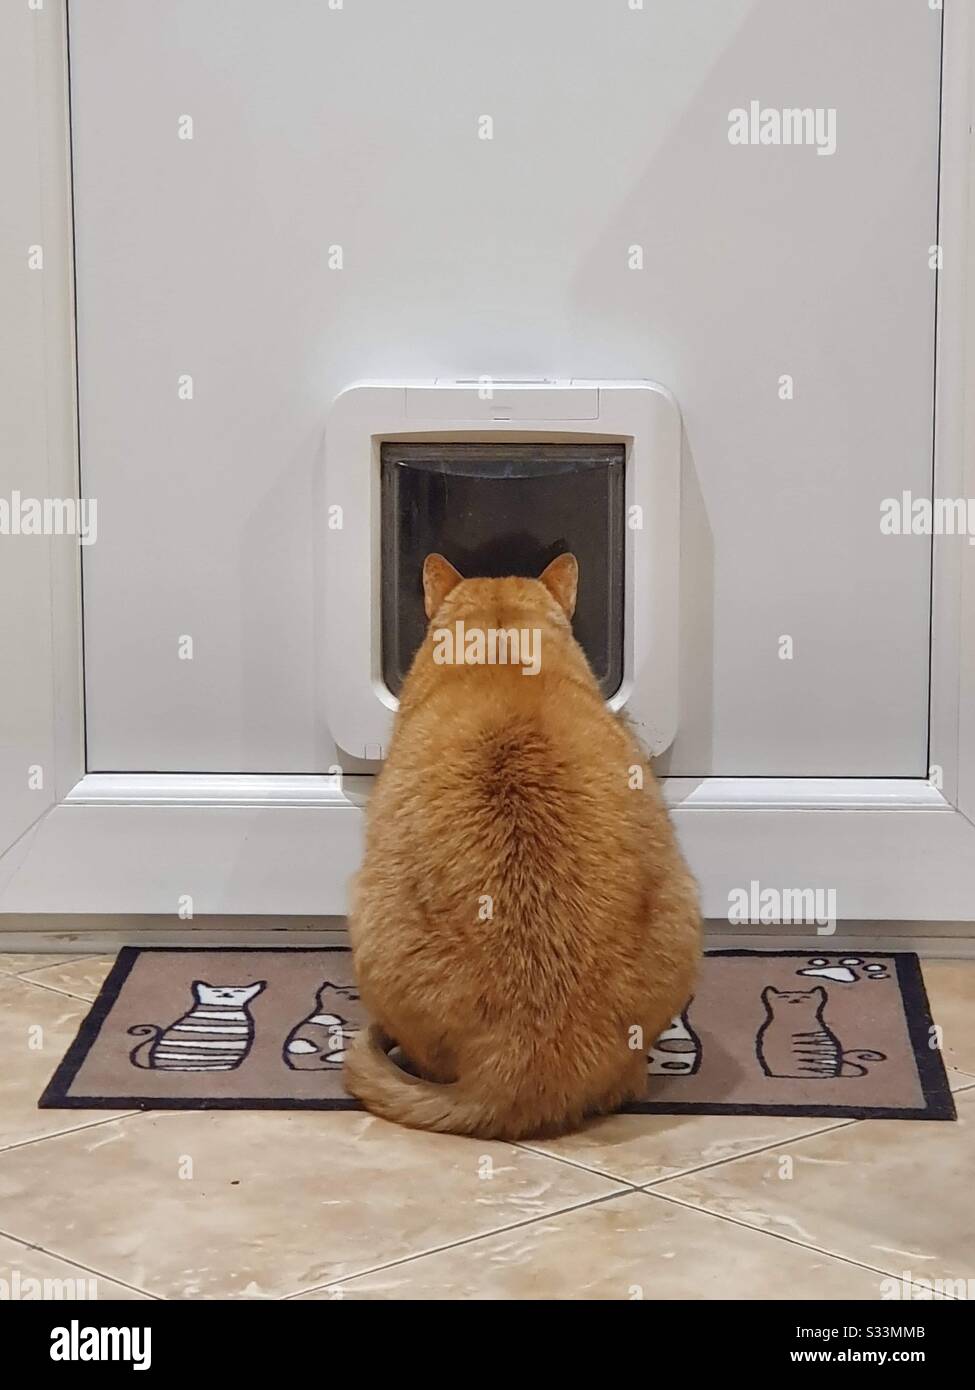 Ginger cat on mat looking out cat flap Stock Photo